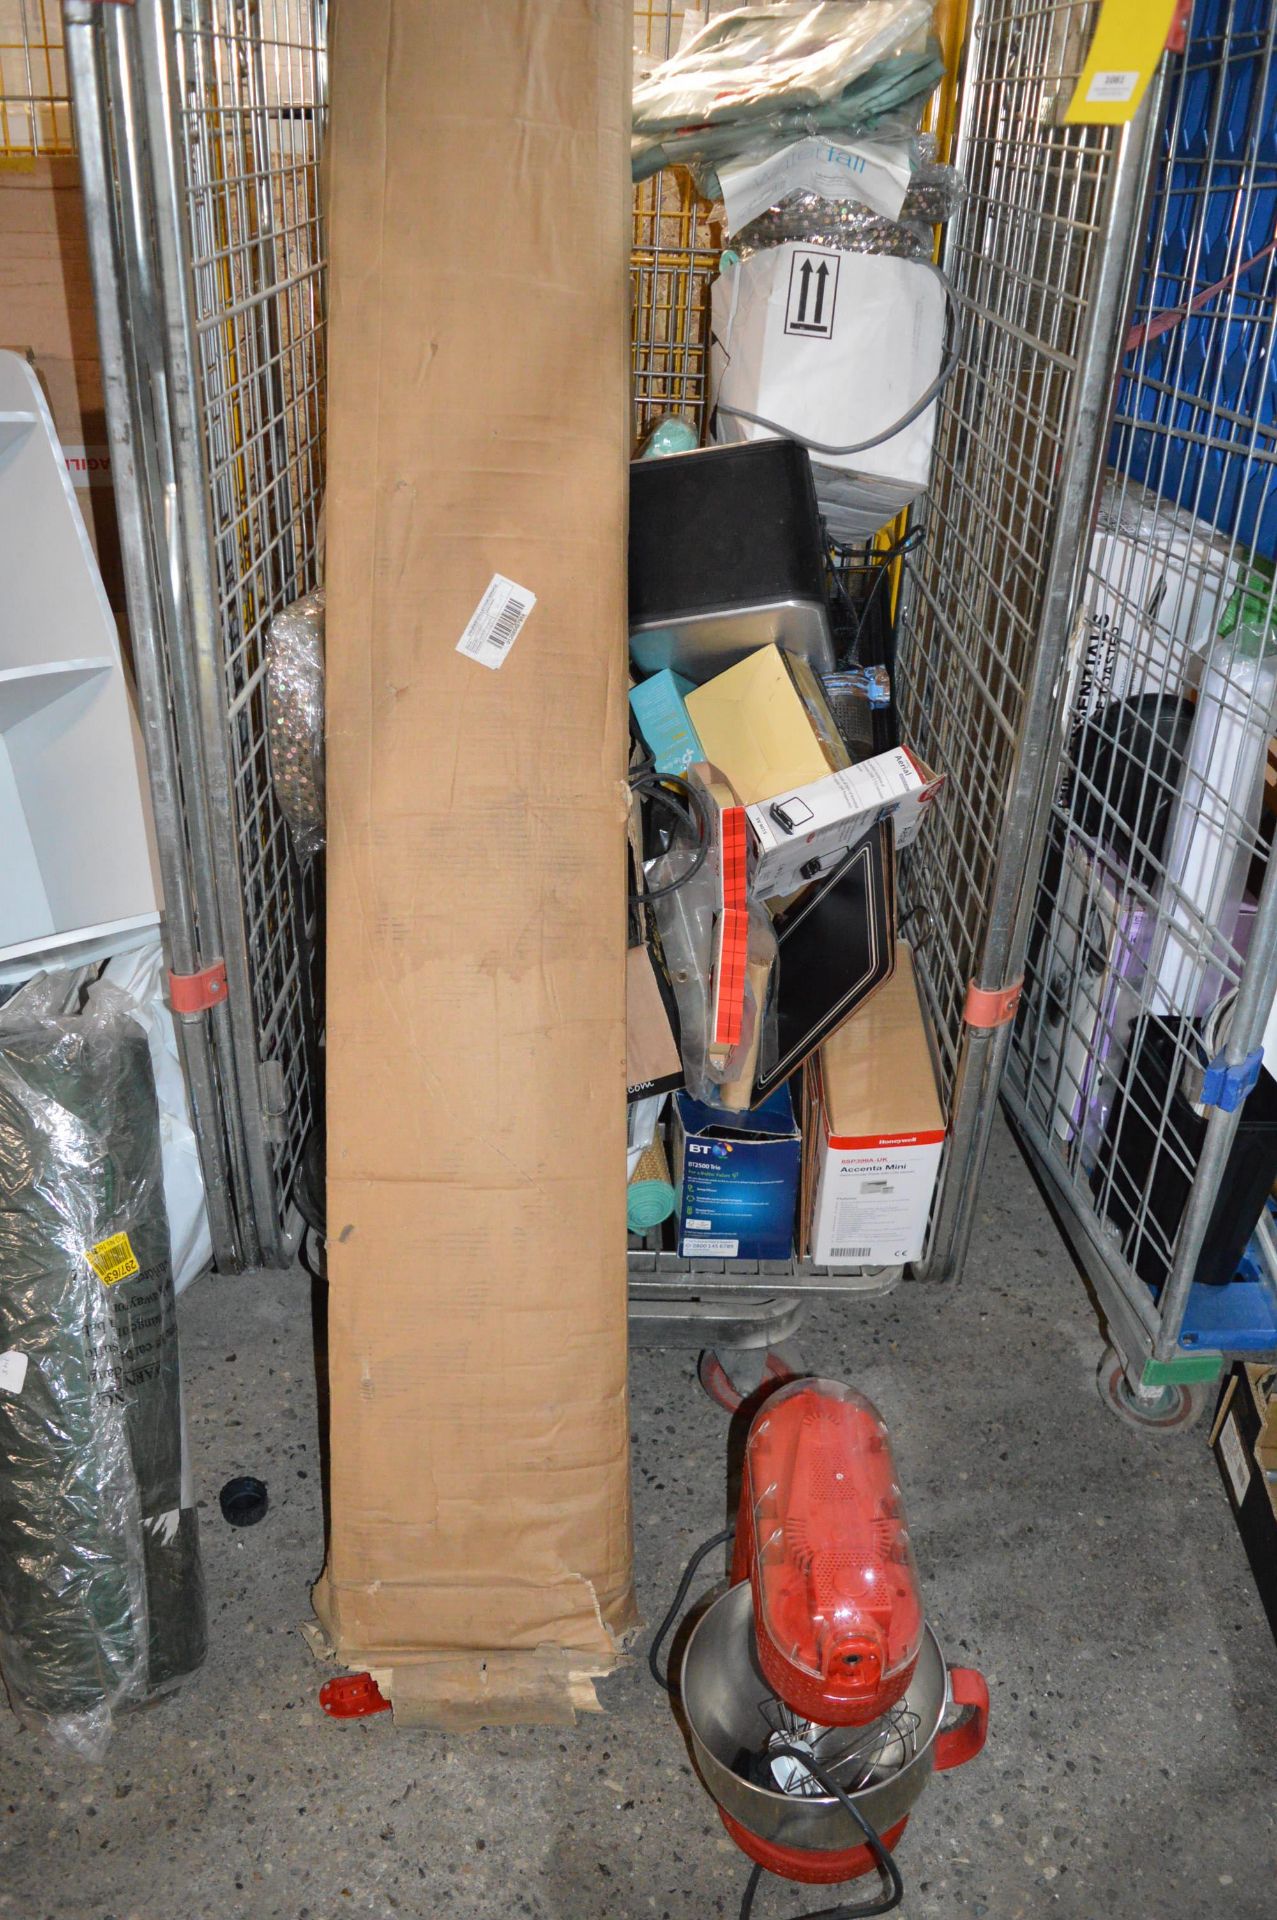 Quantity of Household Items Including Mixer, Telephones, Adapters, Heater, Wine Rack, etc. (cage not